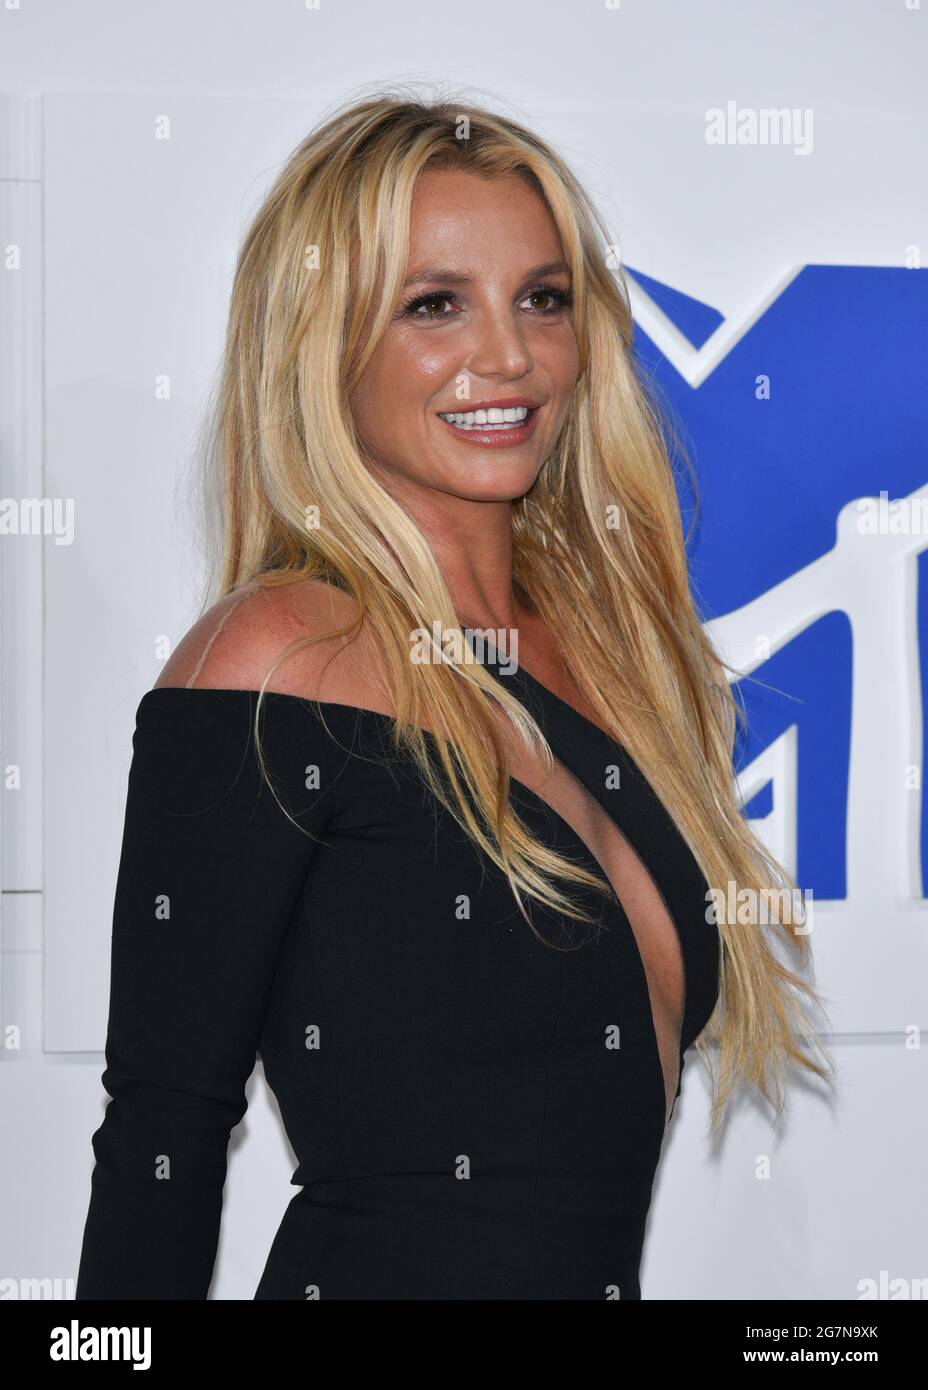 Singer Britney Spears Attends The 2016 Mtv Video Music Awards At Madison Square Garden On August